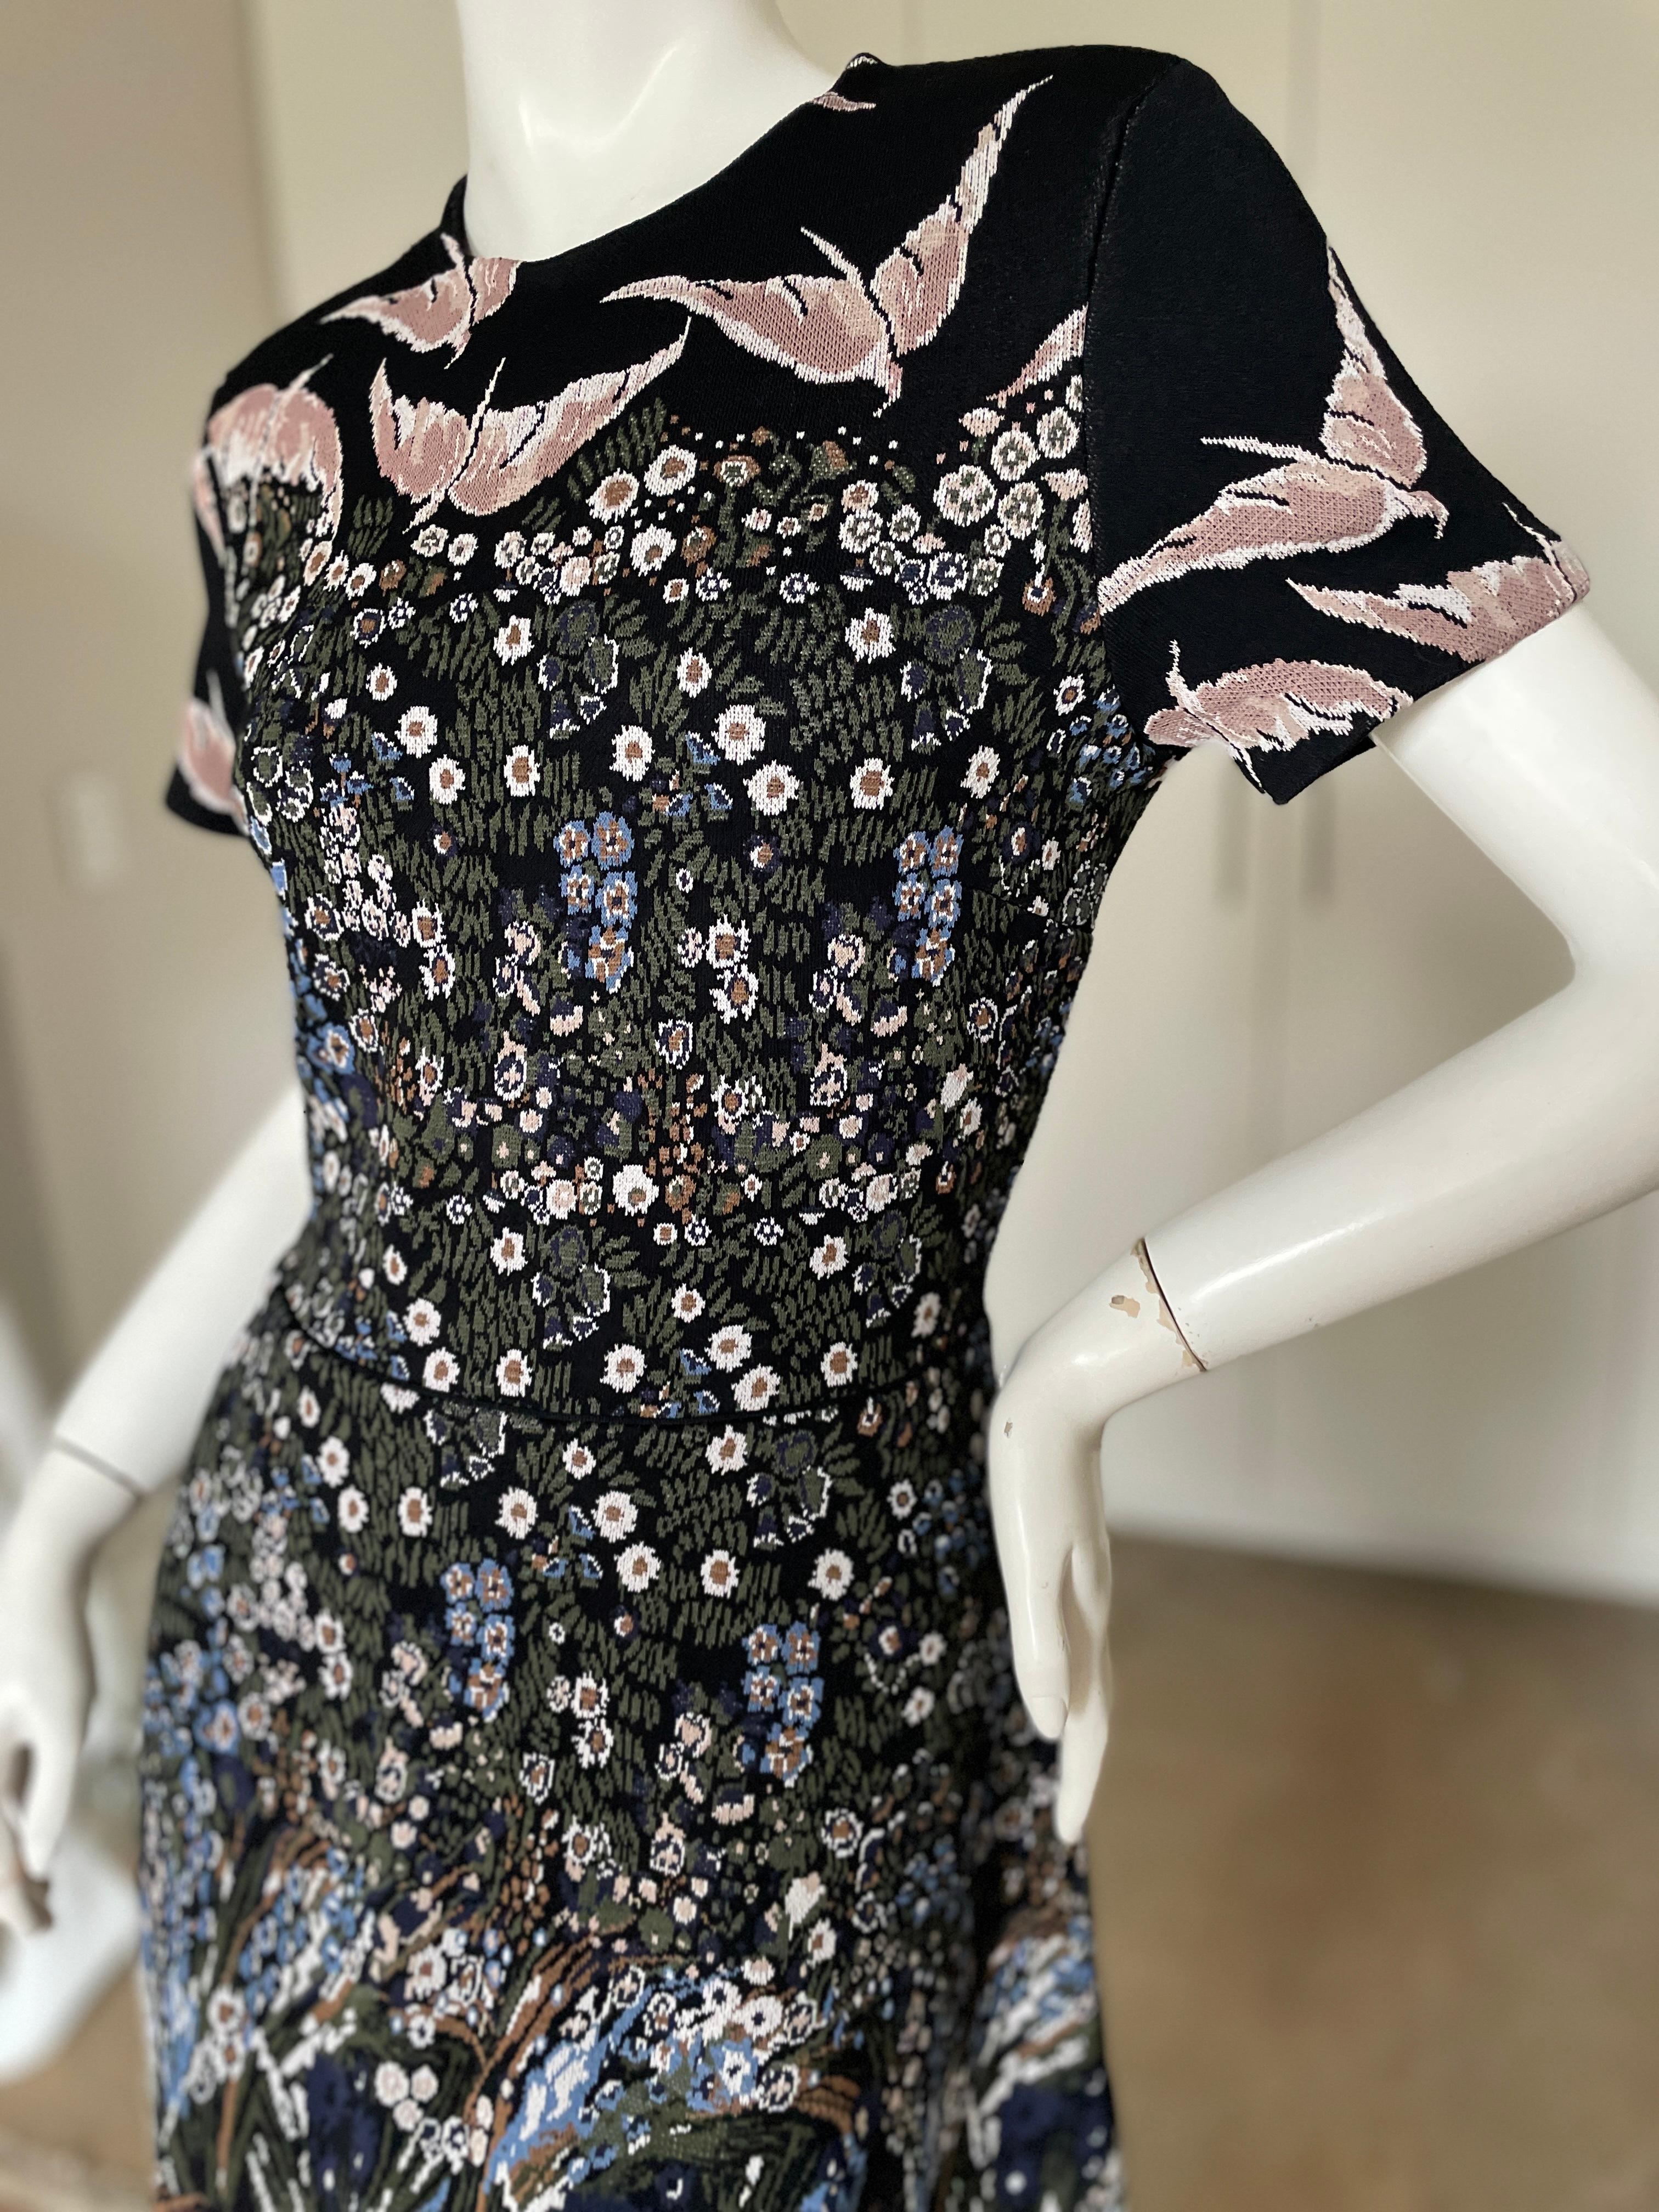 Valentino Inartsia Knit Birds and Flowers Dress In Excellent Condition For Sale In Cloverdale, CA